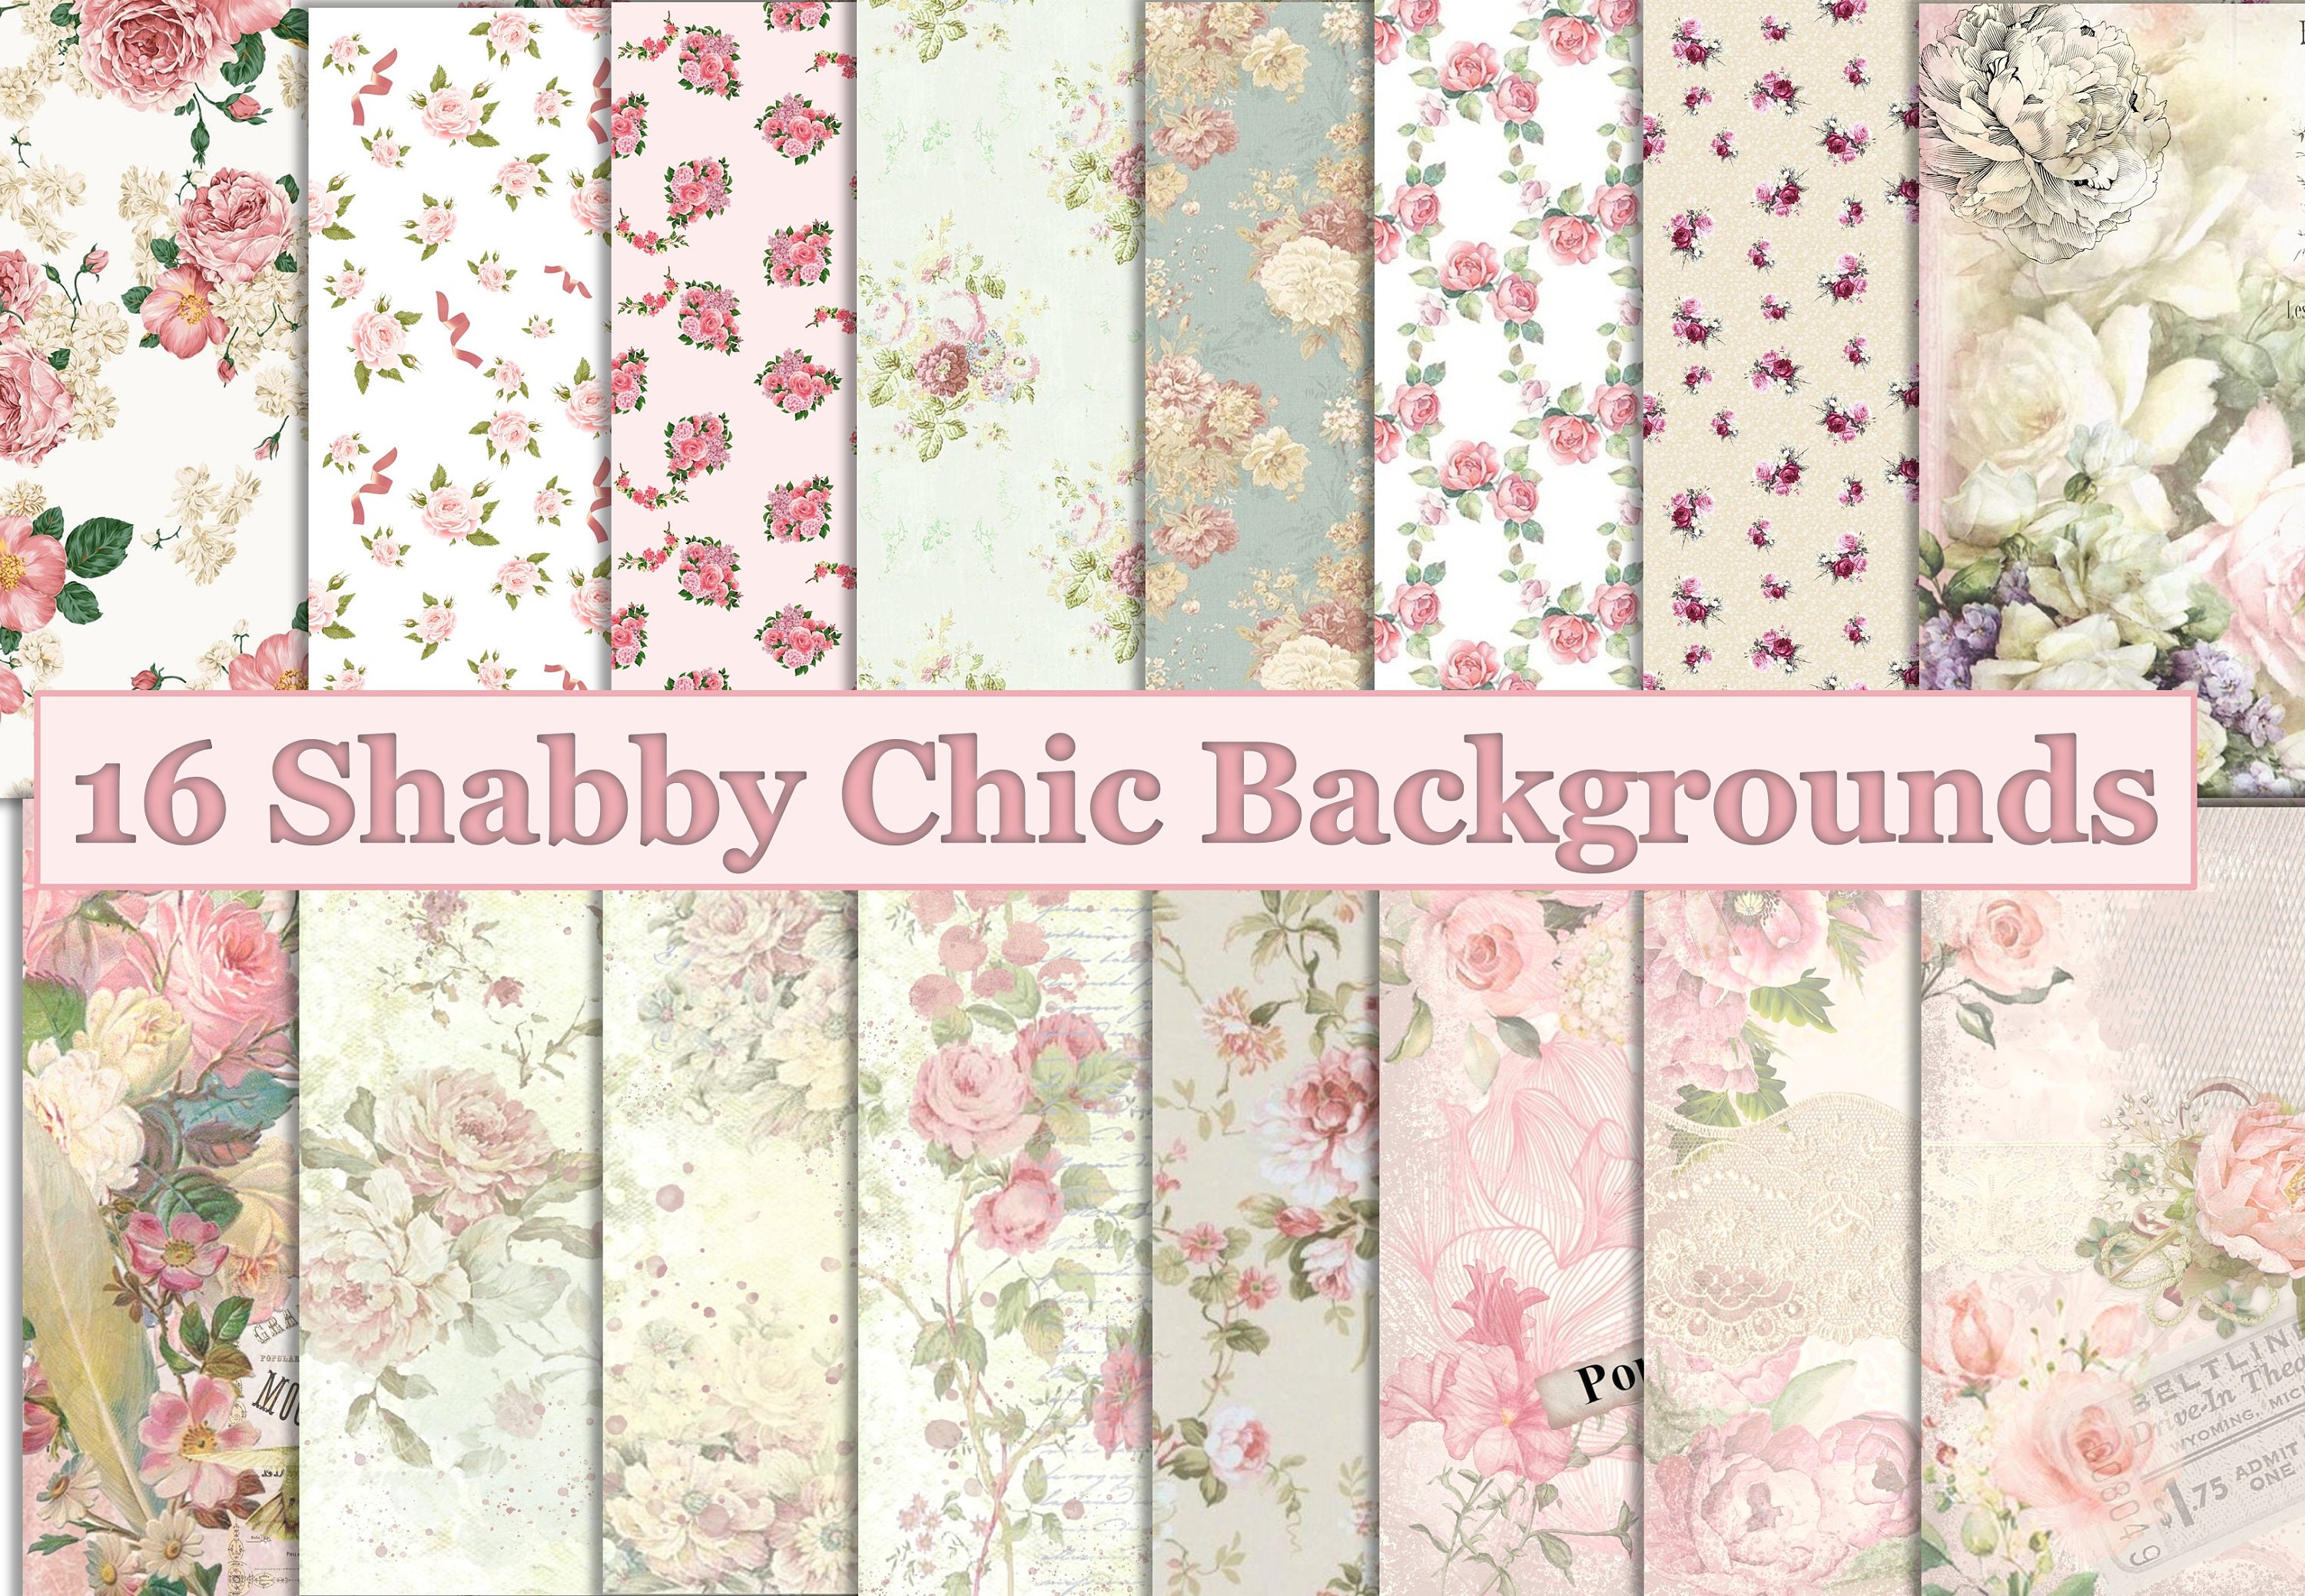 Economisch atleet sjaal Printable Vintage Shabby Chic Backgrounds Digital Paper A4 - Etsy Singapore